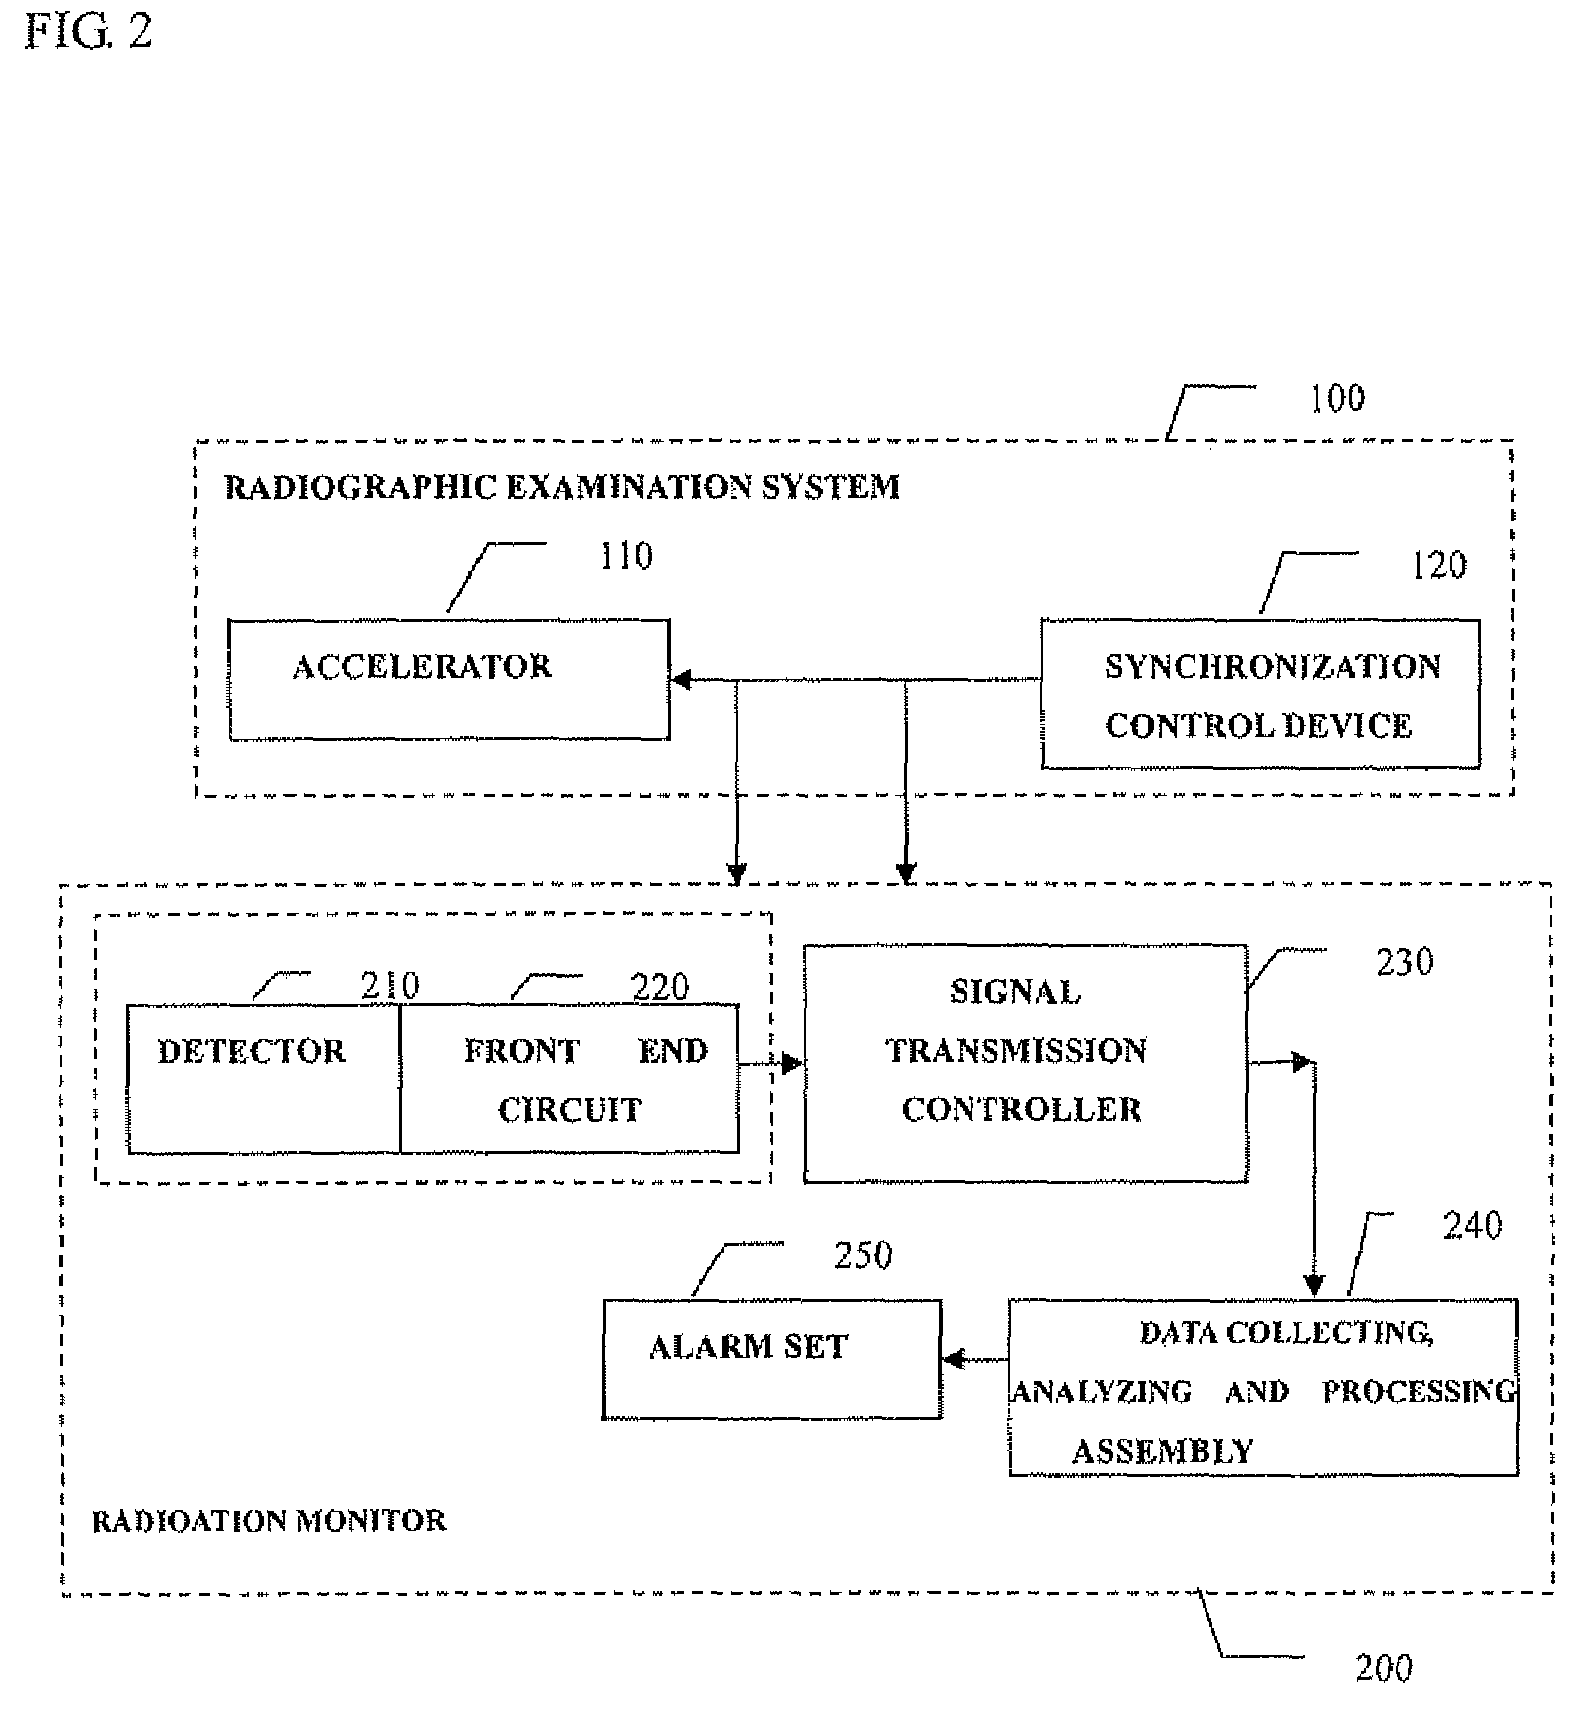 System and method capable of simultaneous radiographic examination and radioactive material inspection